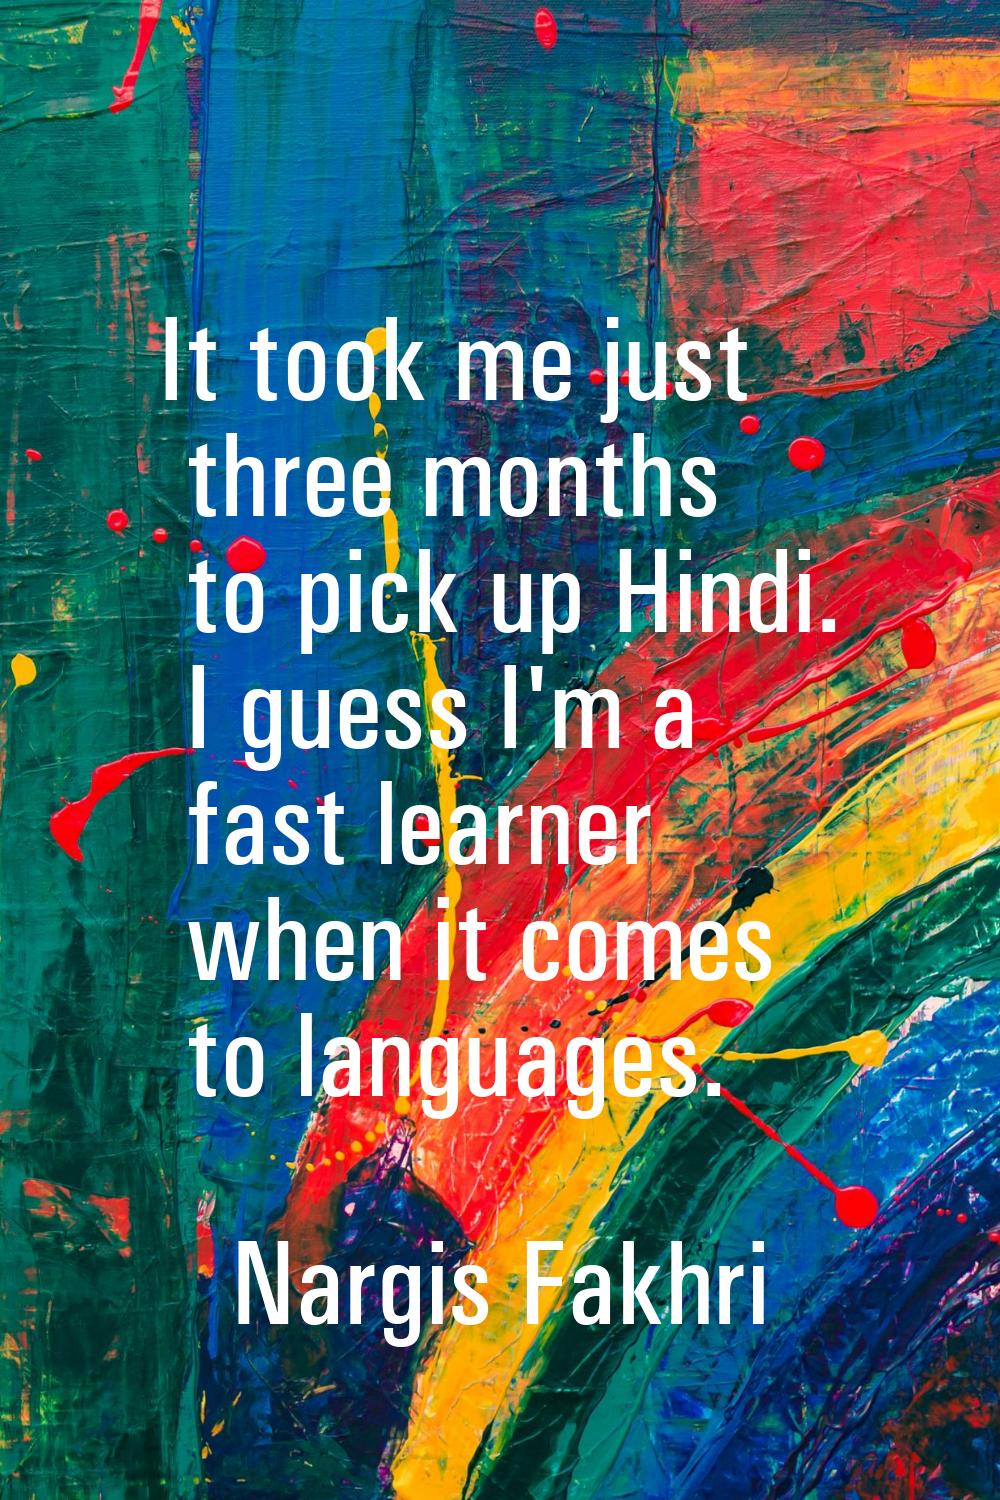 It took me just three months to pick up Hindi. I guess I'm a fast learner when it comes to language